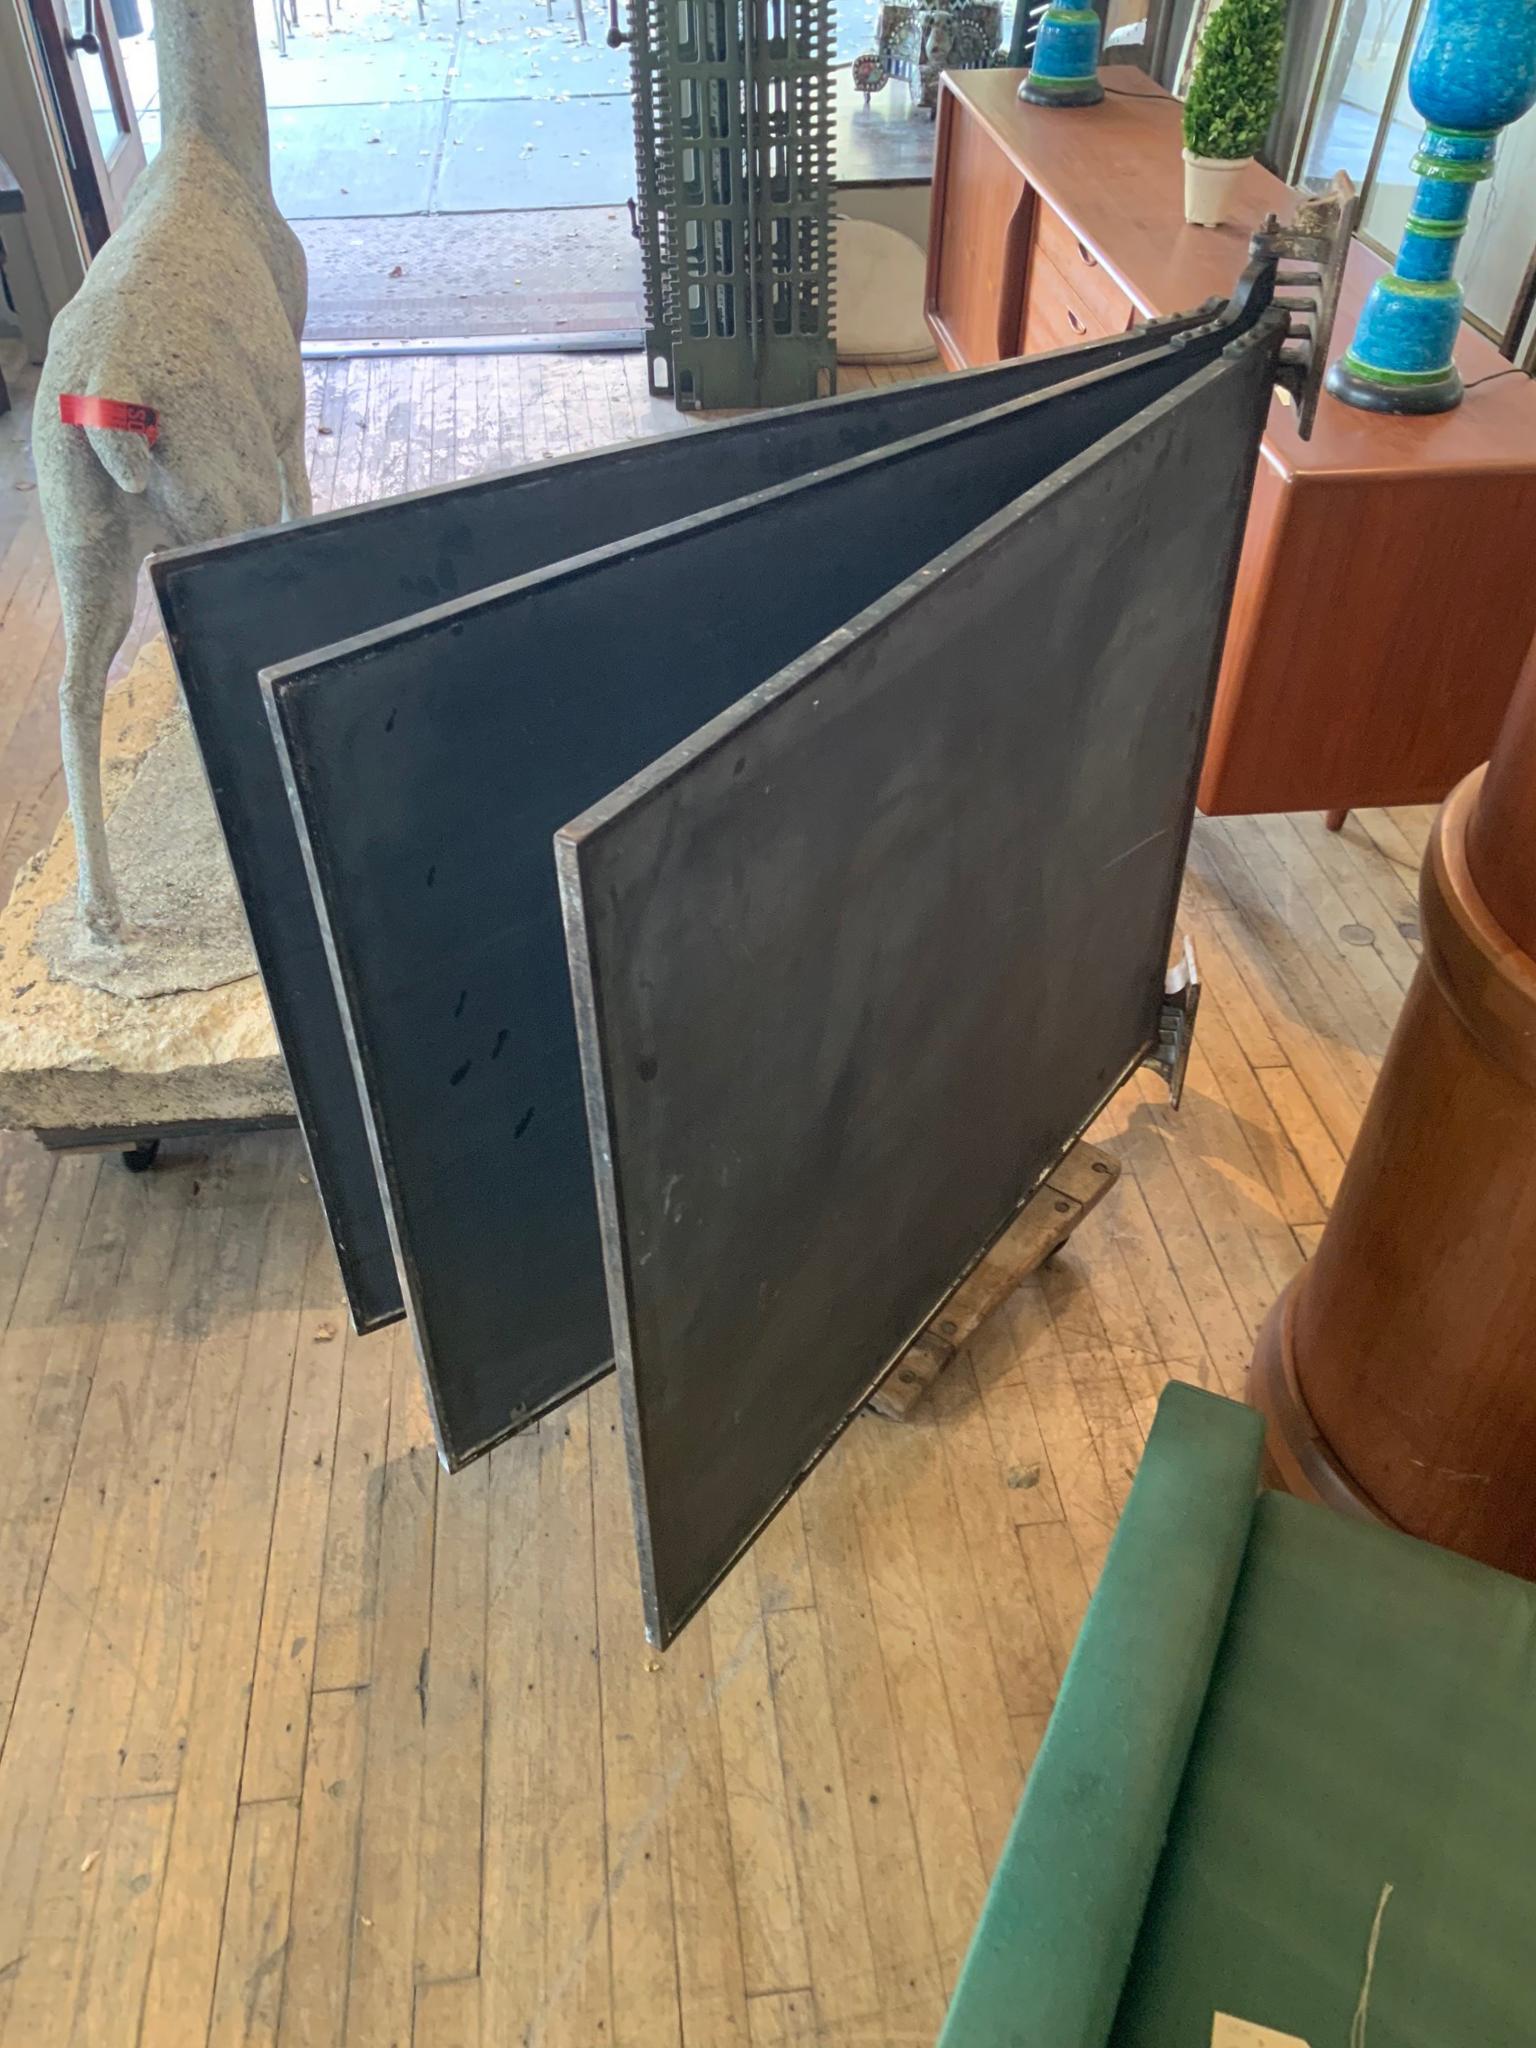 An outstanding set of antique slate chalkboards in their original frames with cast iron corners, along with the cast iron wall-mounted brackets that hold them all and allow them to pivot to use both sides of the boards. Beautiful set in good